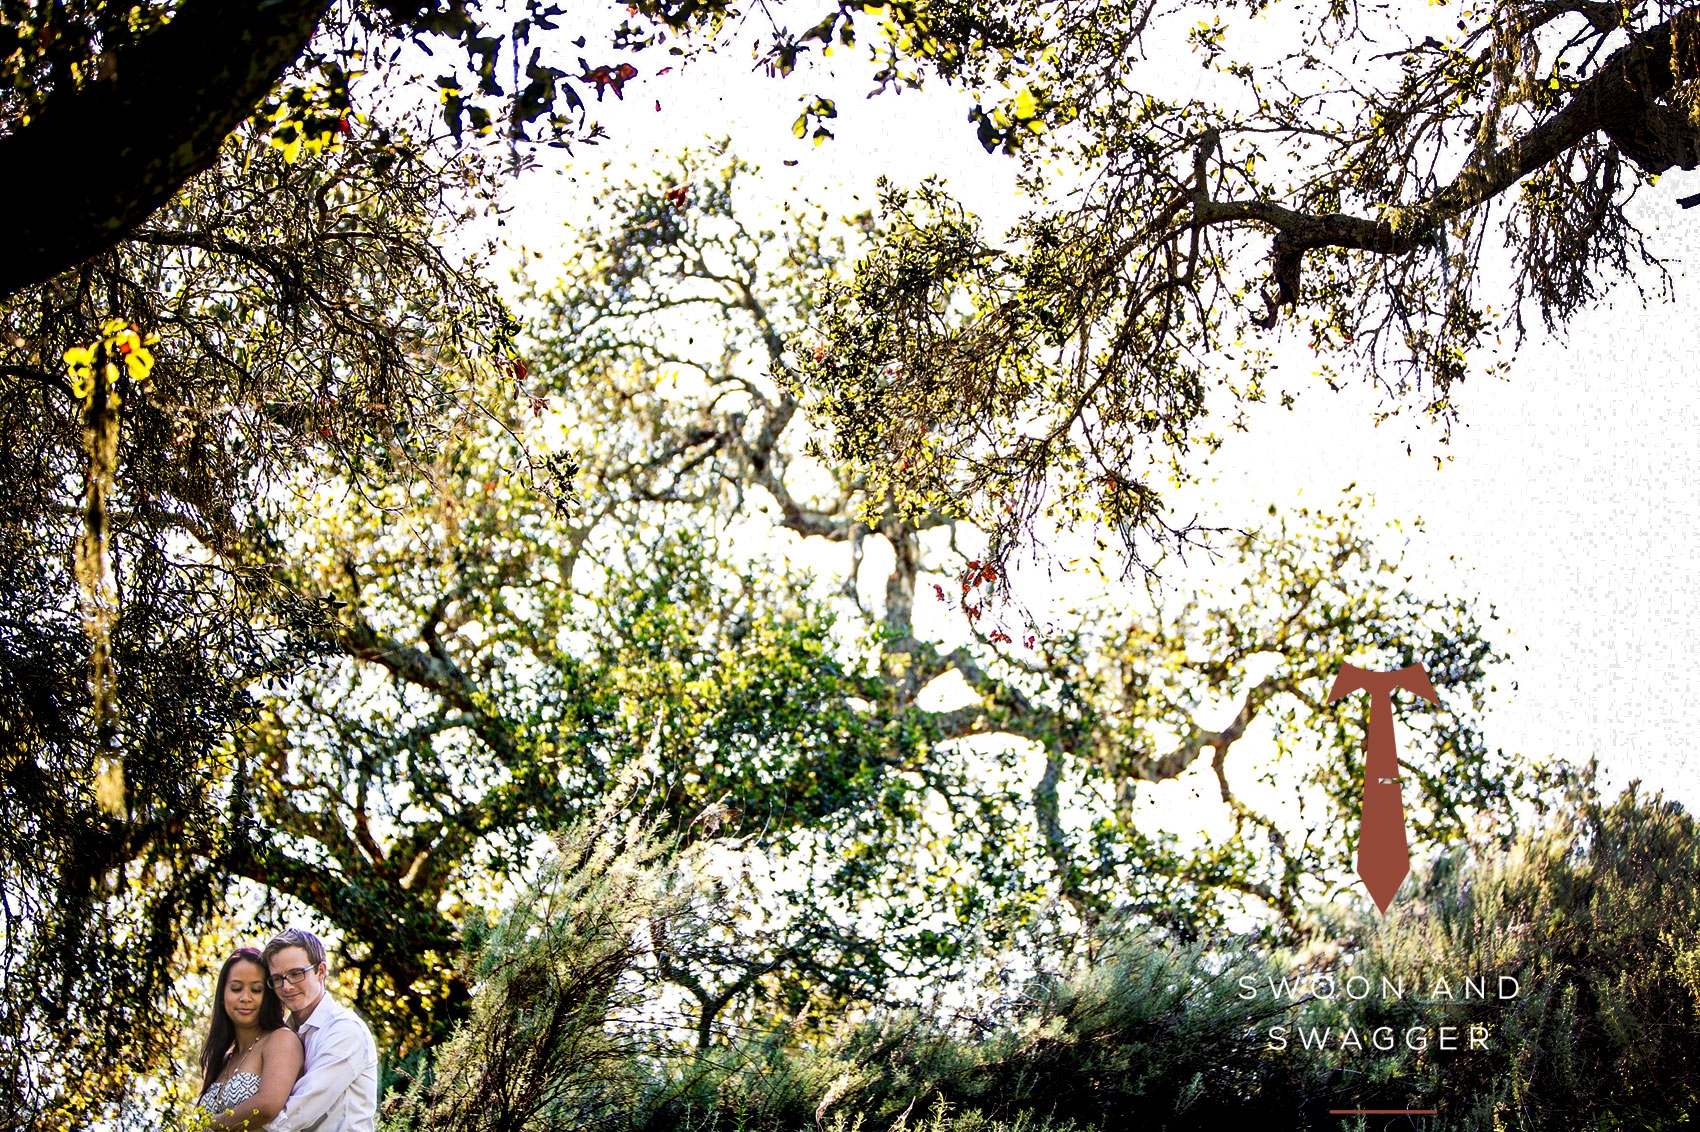 Zaca Mesa Winery Engagement session photo swoon and swagger